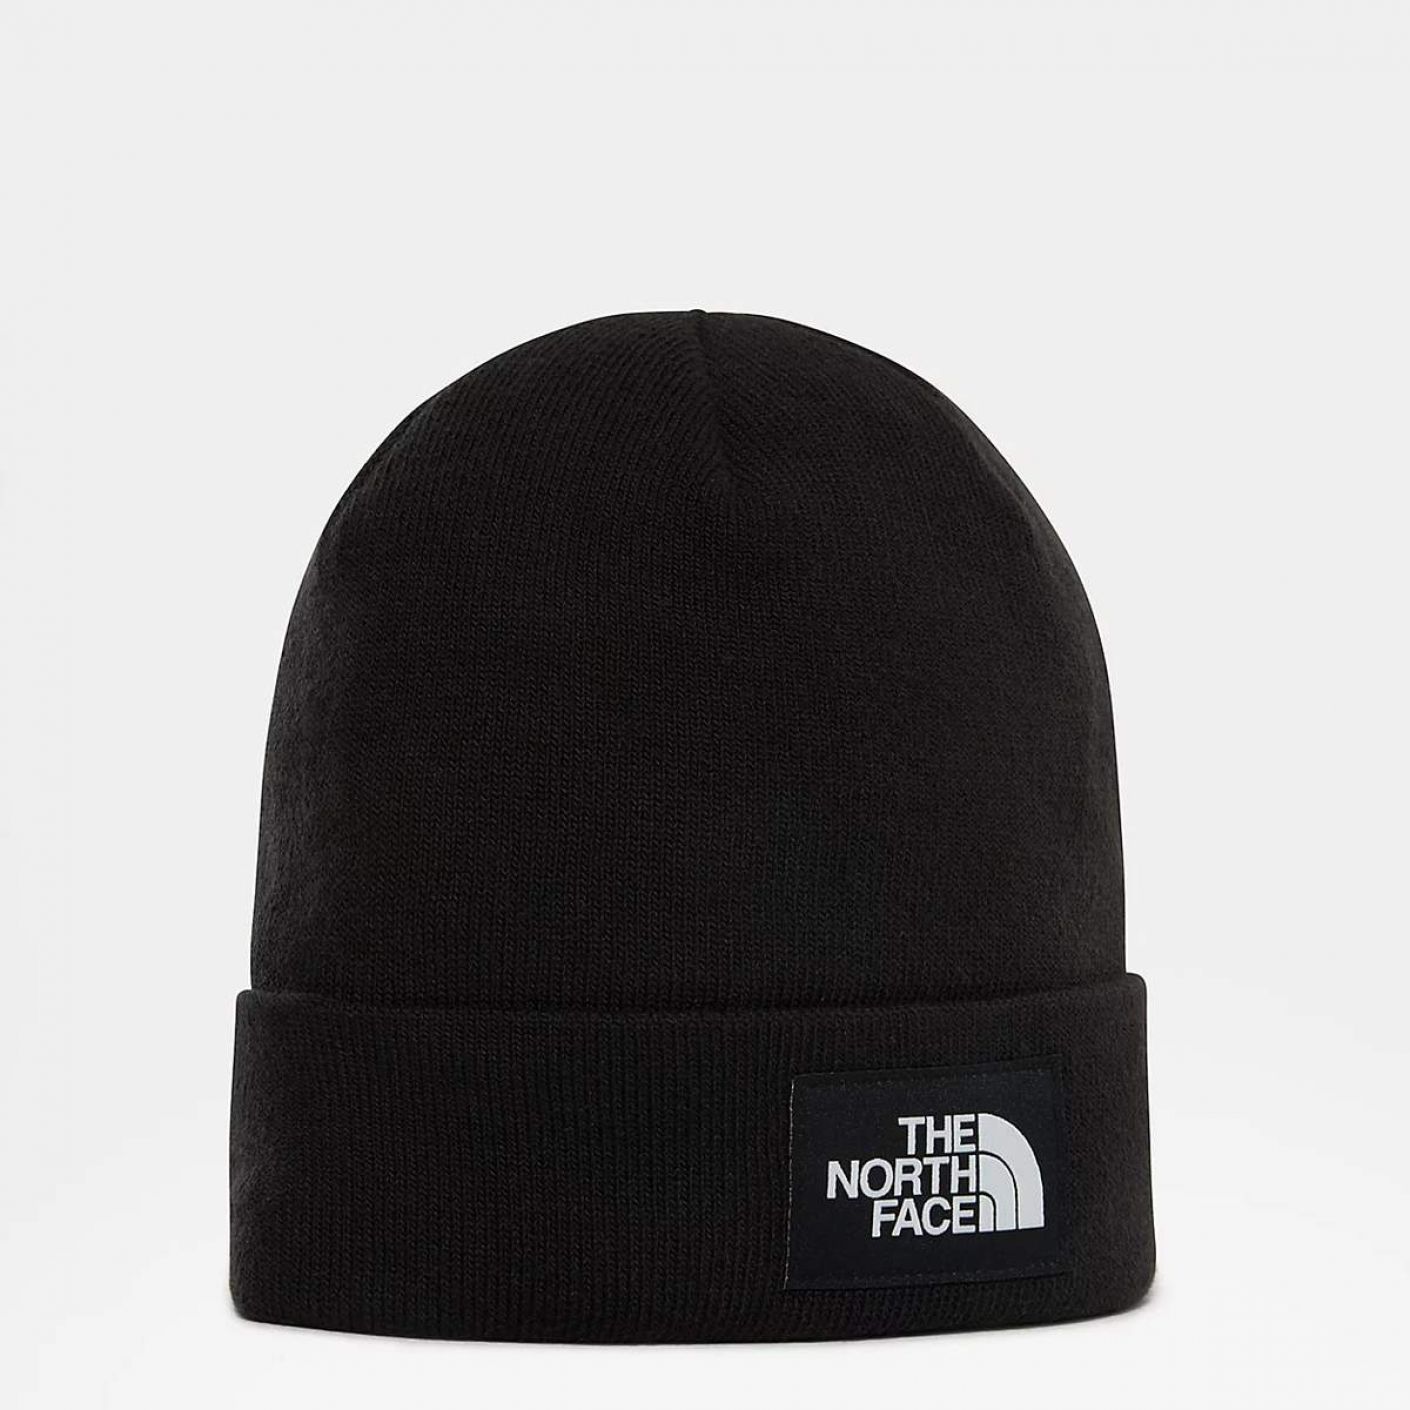 The north face Dock worker recycled beanie tnf black NF0A3FNTJK31